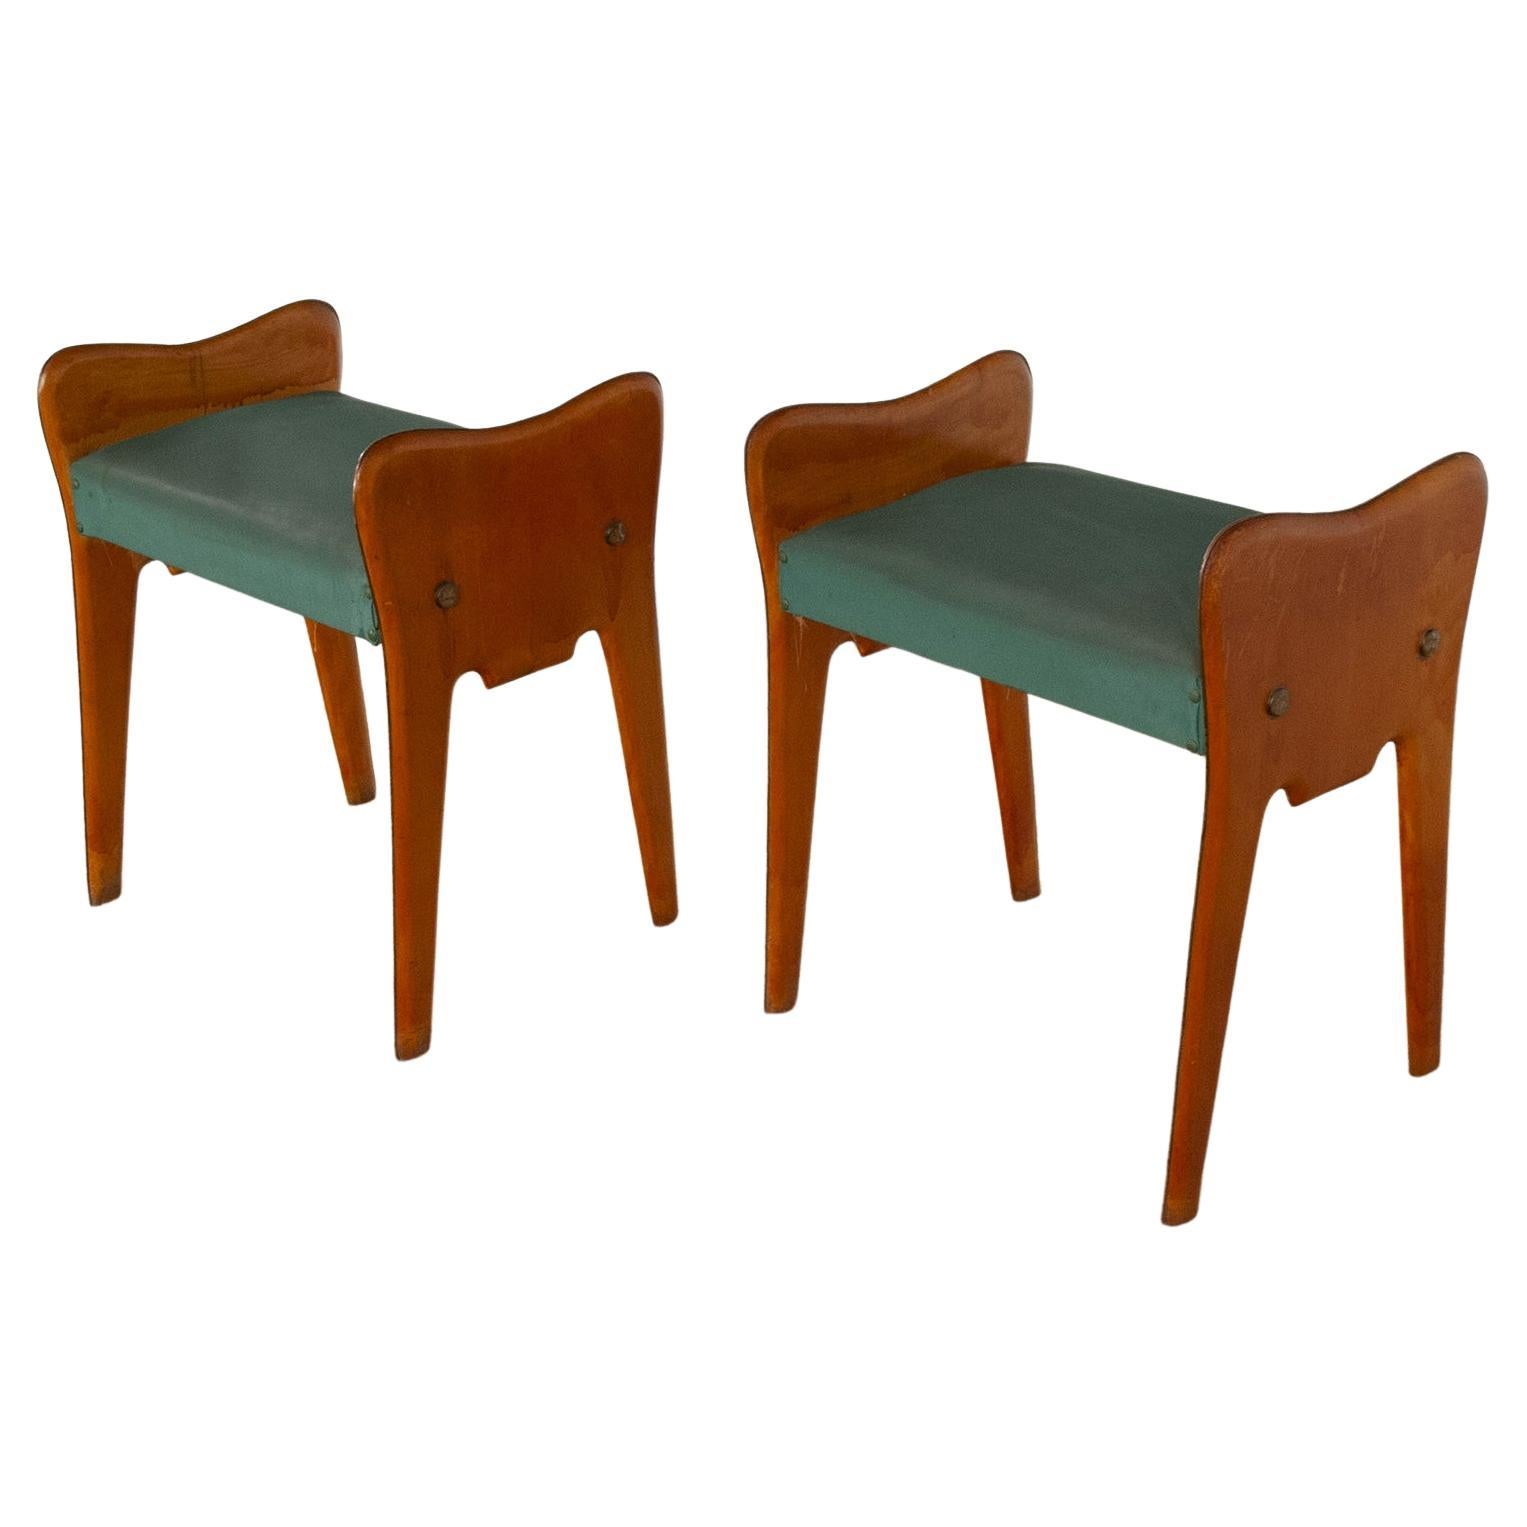 Italian Mid-Century Pair of Wooden Benches from the 1950s